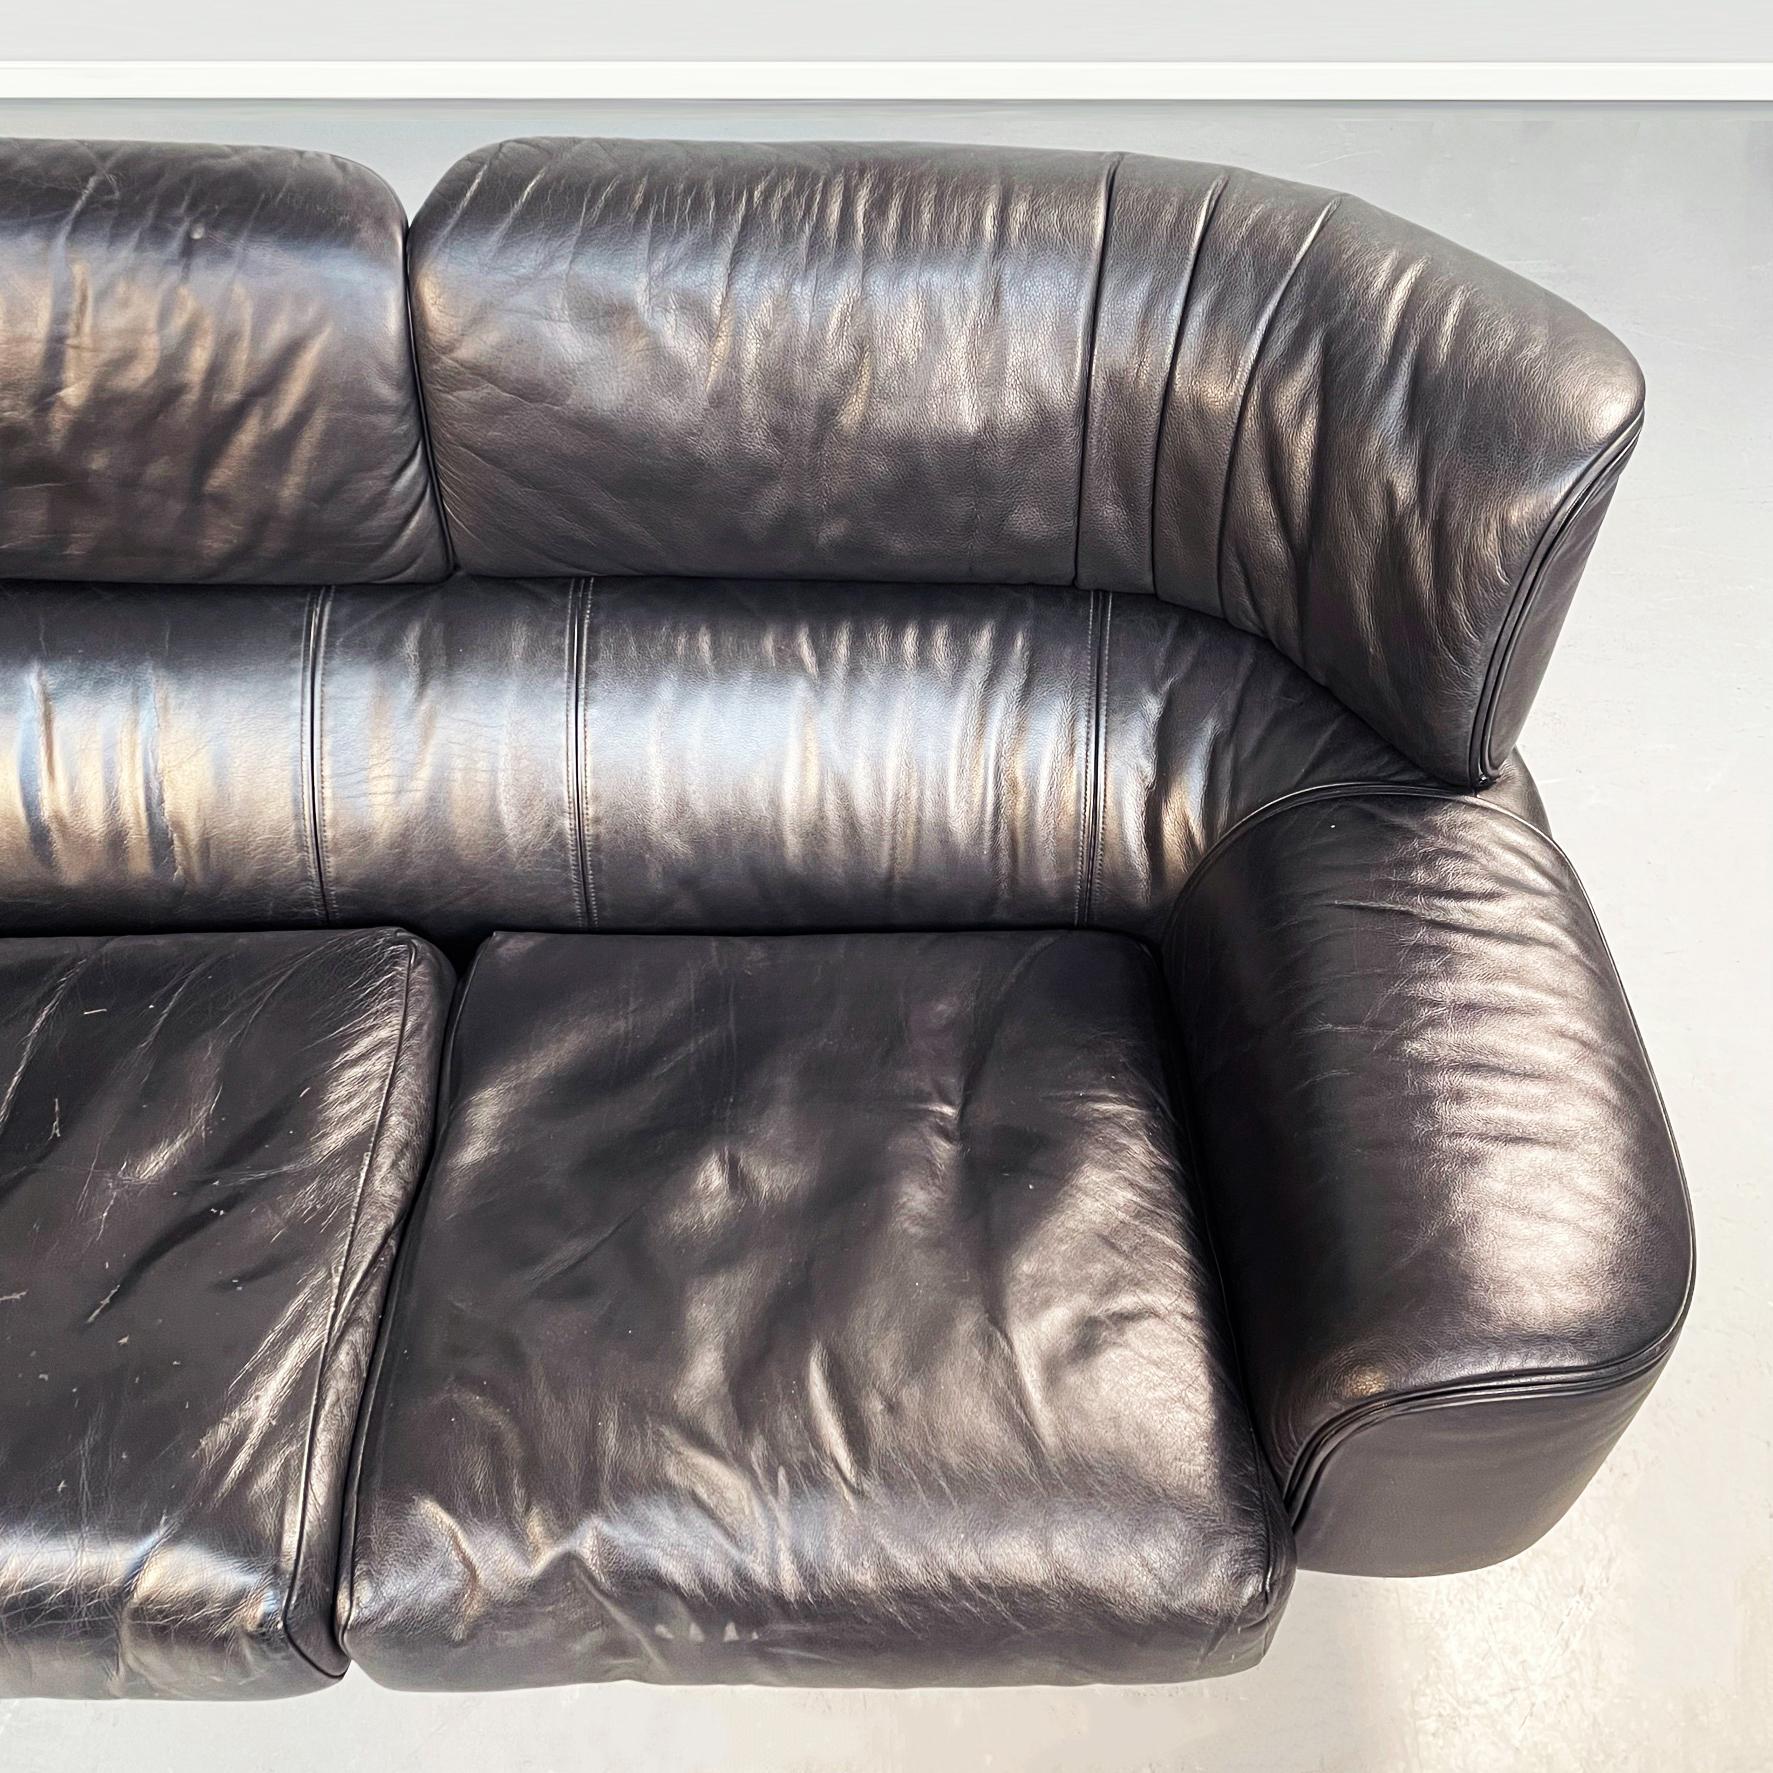 Italian Modern Black Leather Wood 3seat Sofa Bull by Frattini for Cassina, 1980s For Sale 3